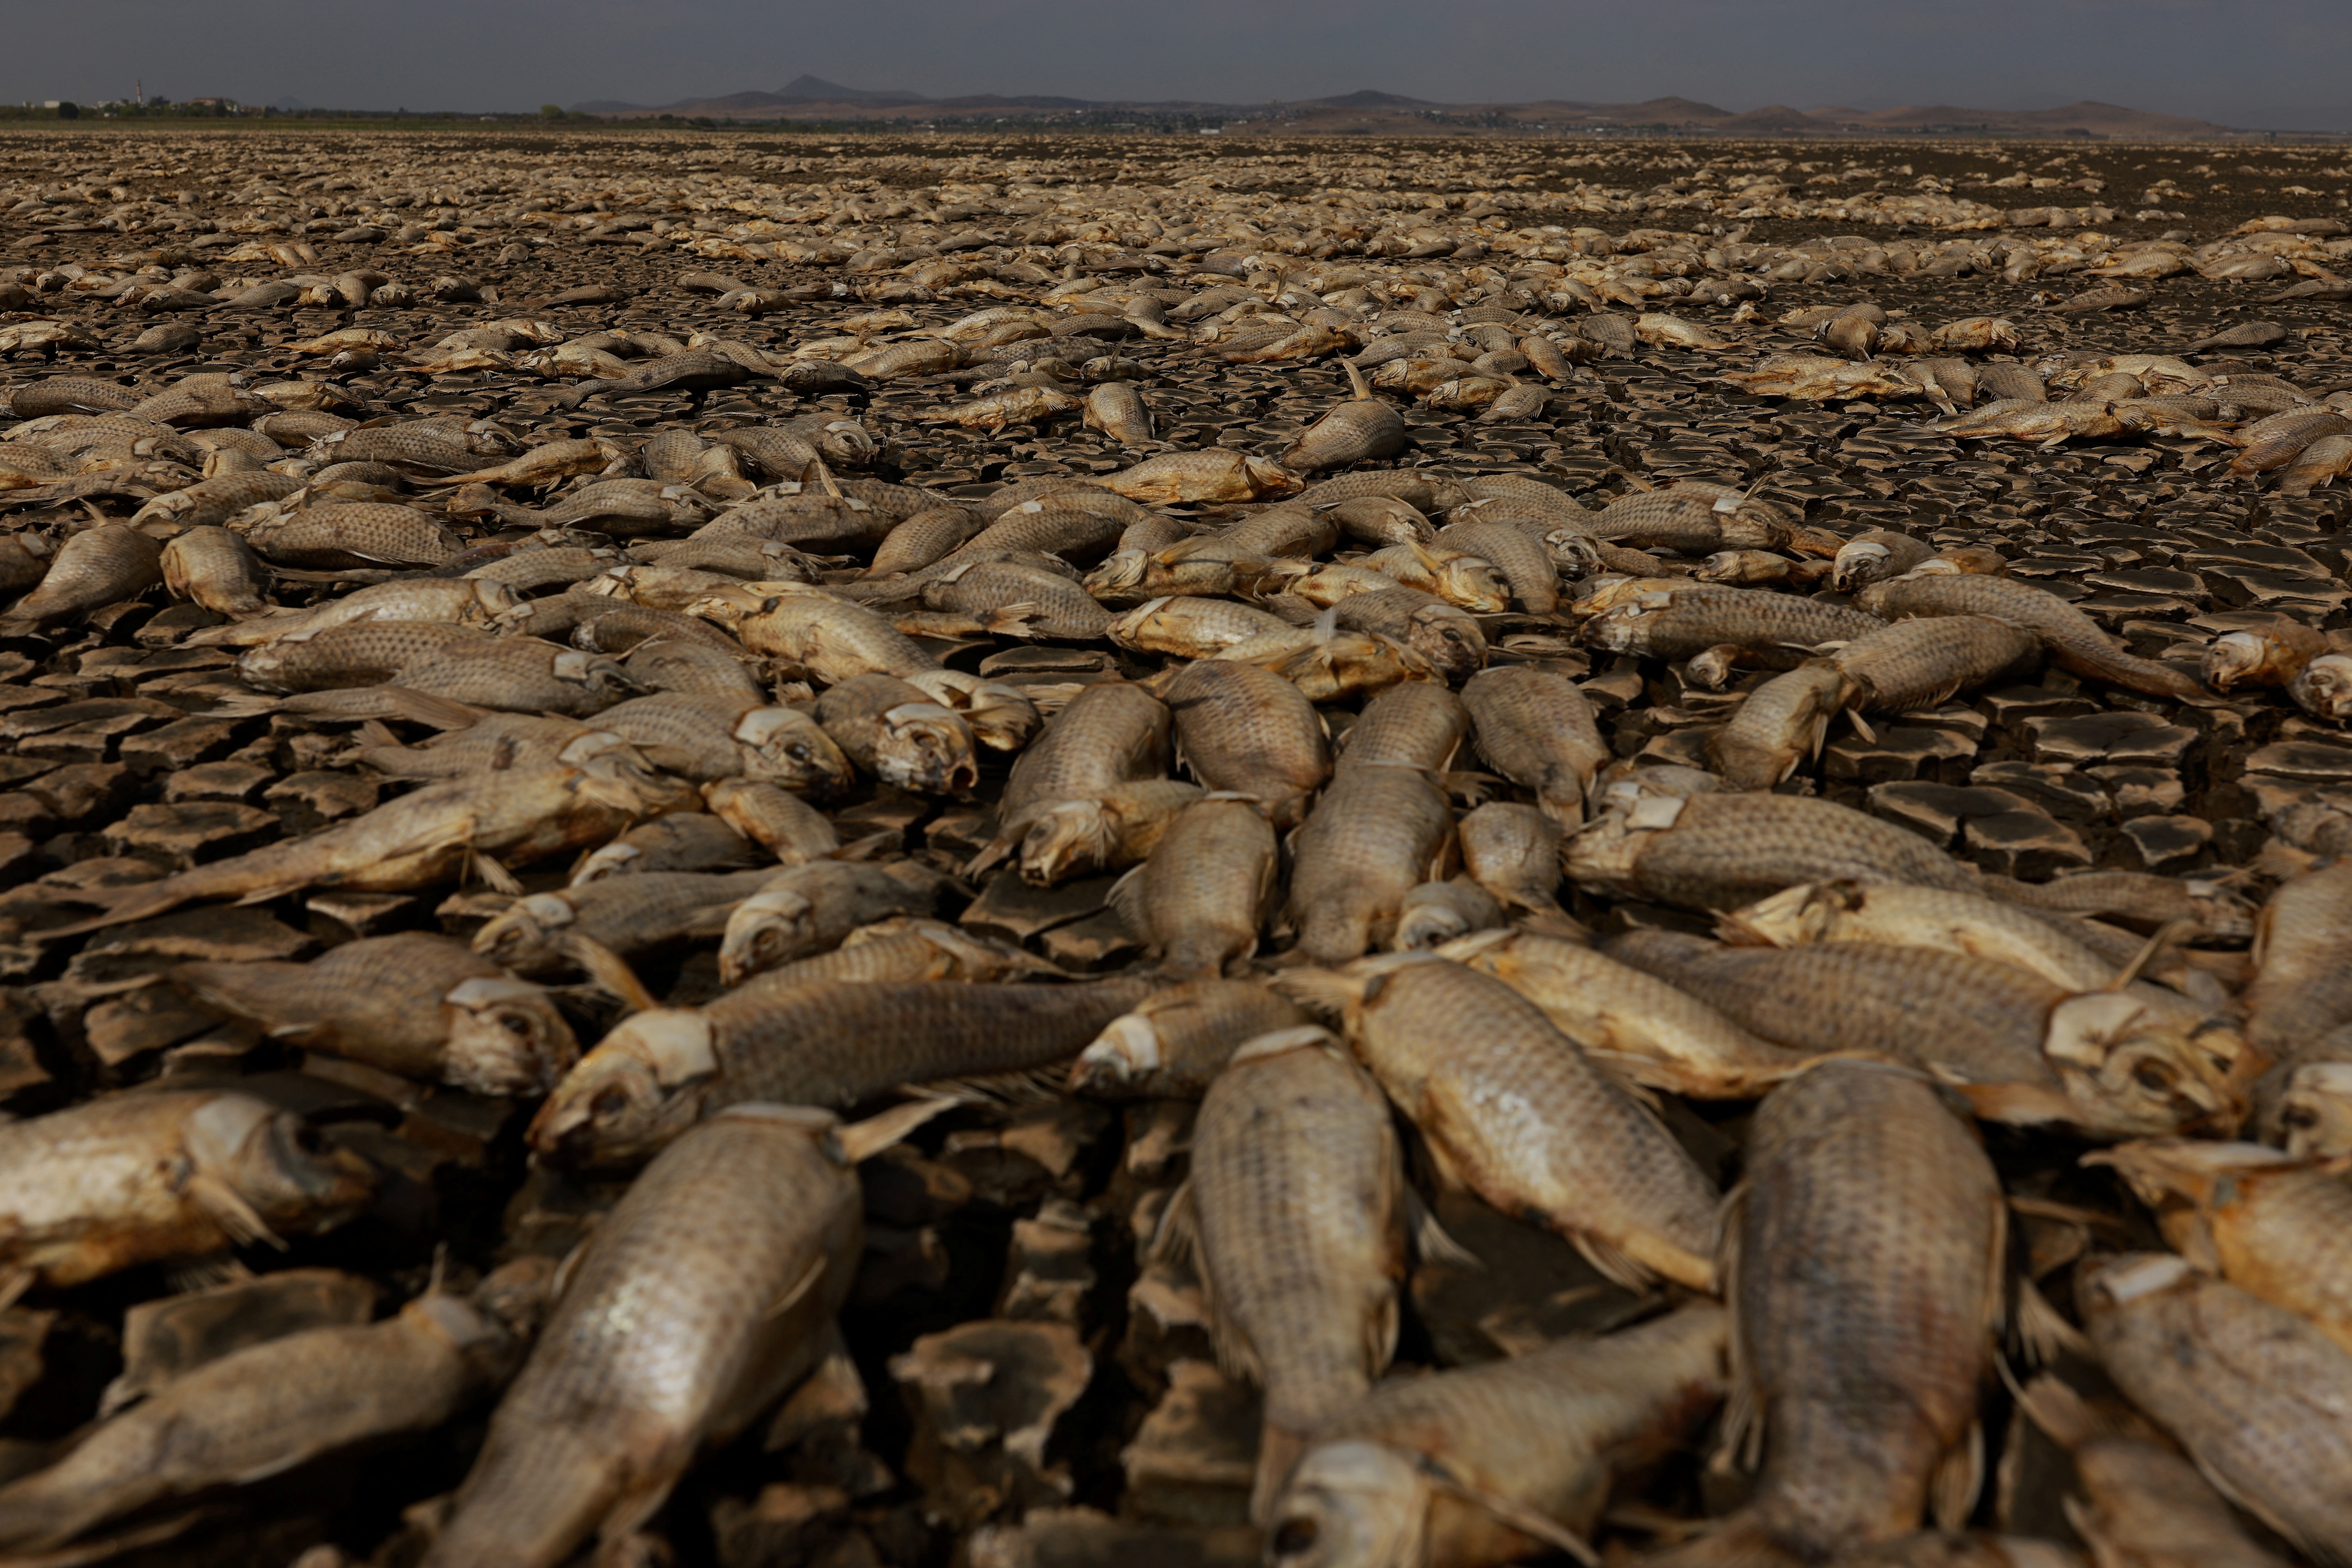 Mass fish death in Mexico's Chihuahua State blamed on severe drought